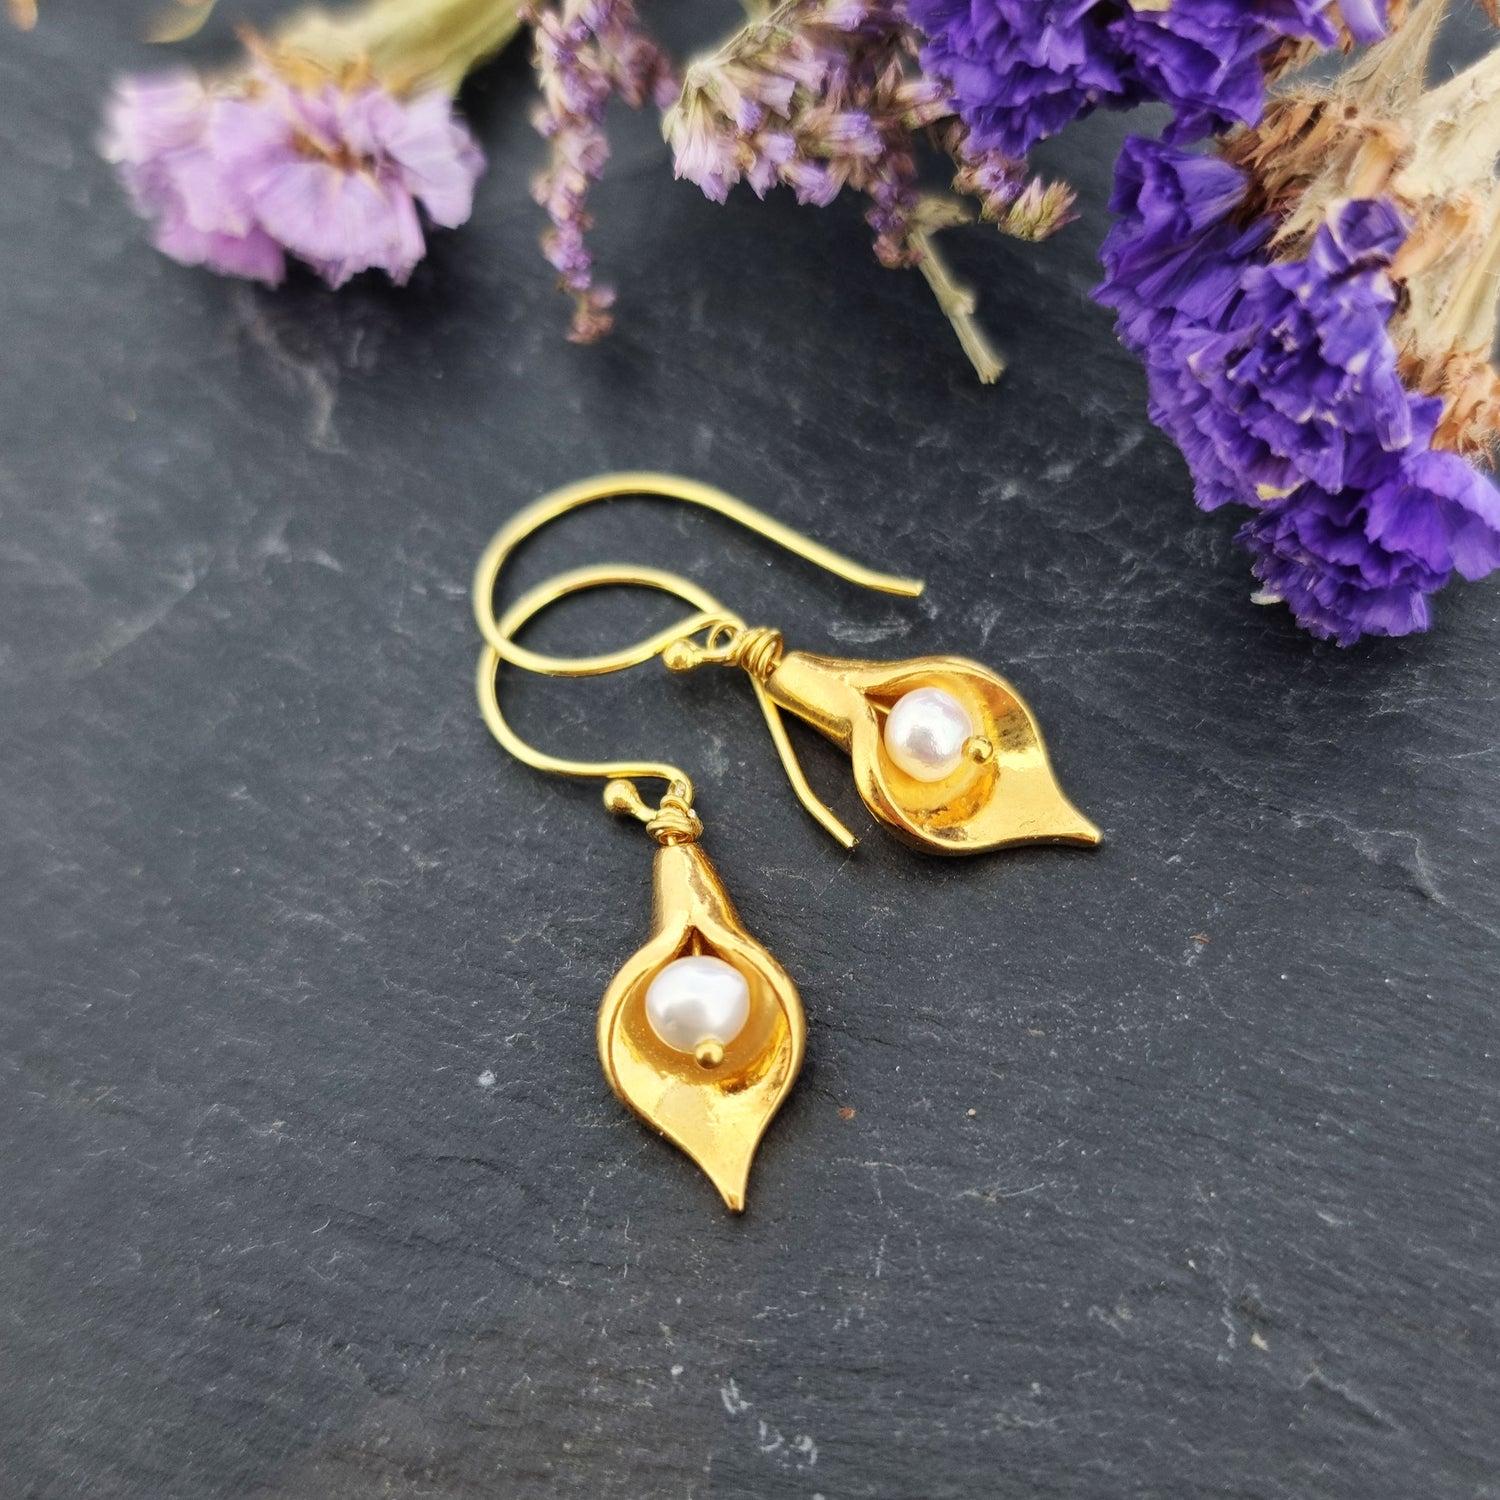 Yellow gold vermeil cala lily drop earrings with freshwater pearls. Pictured with flowers.